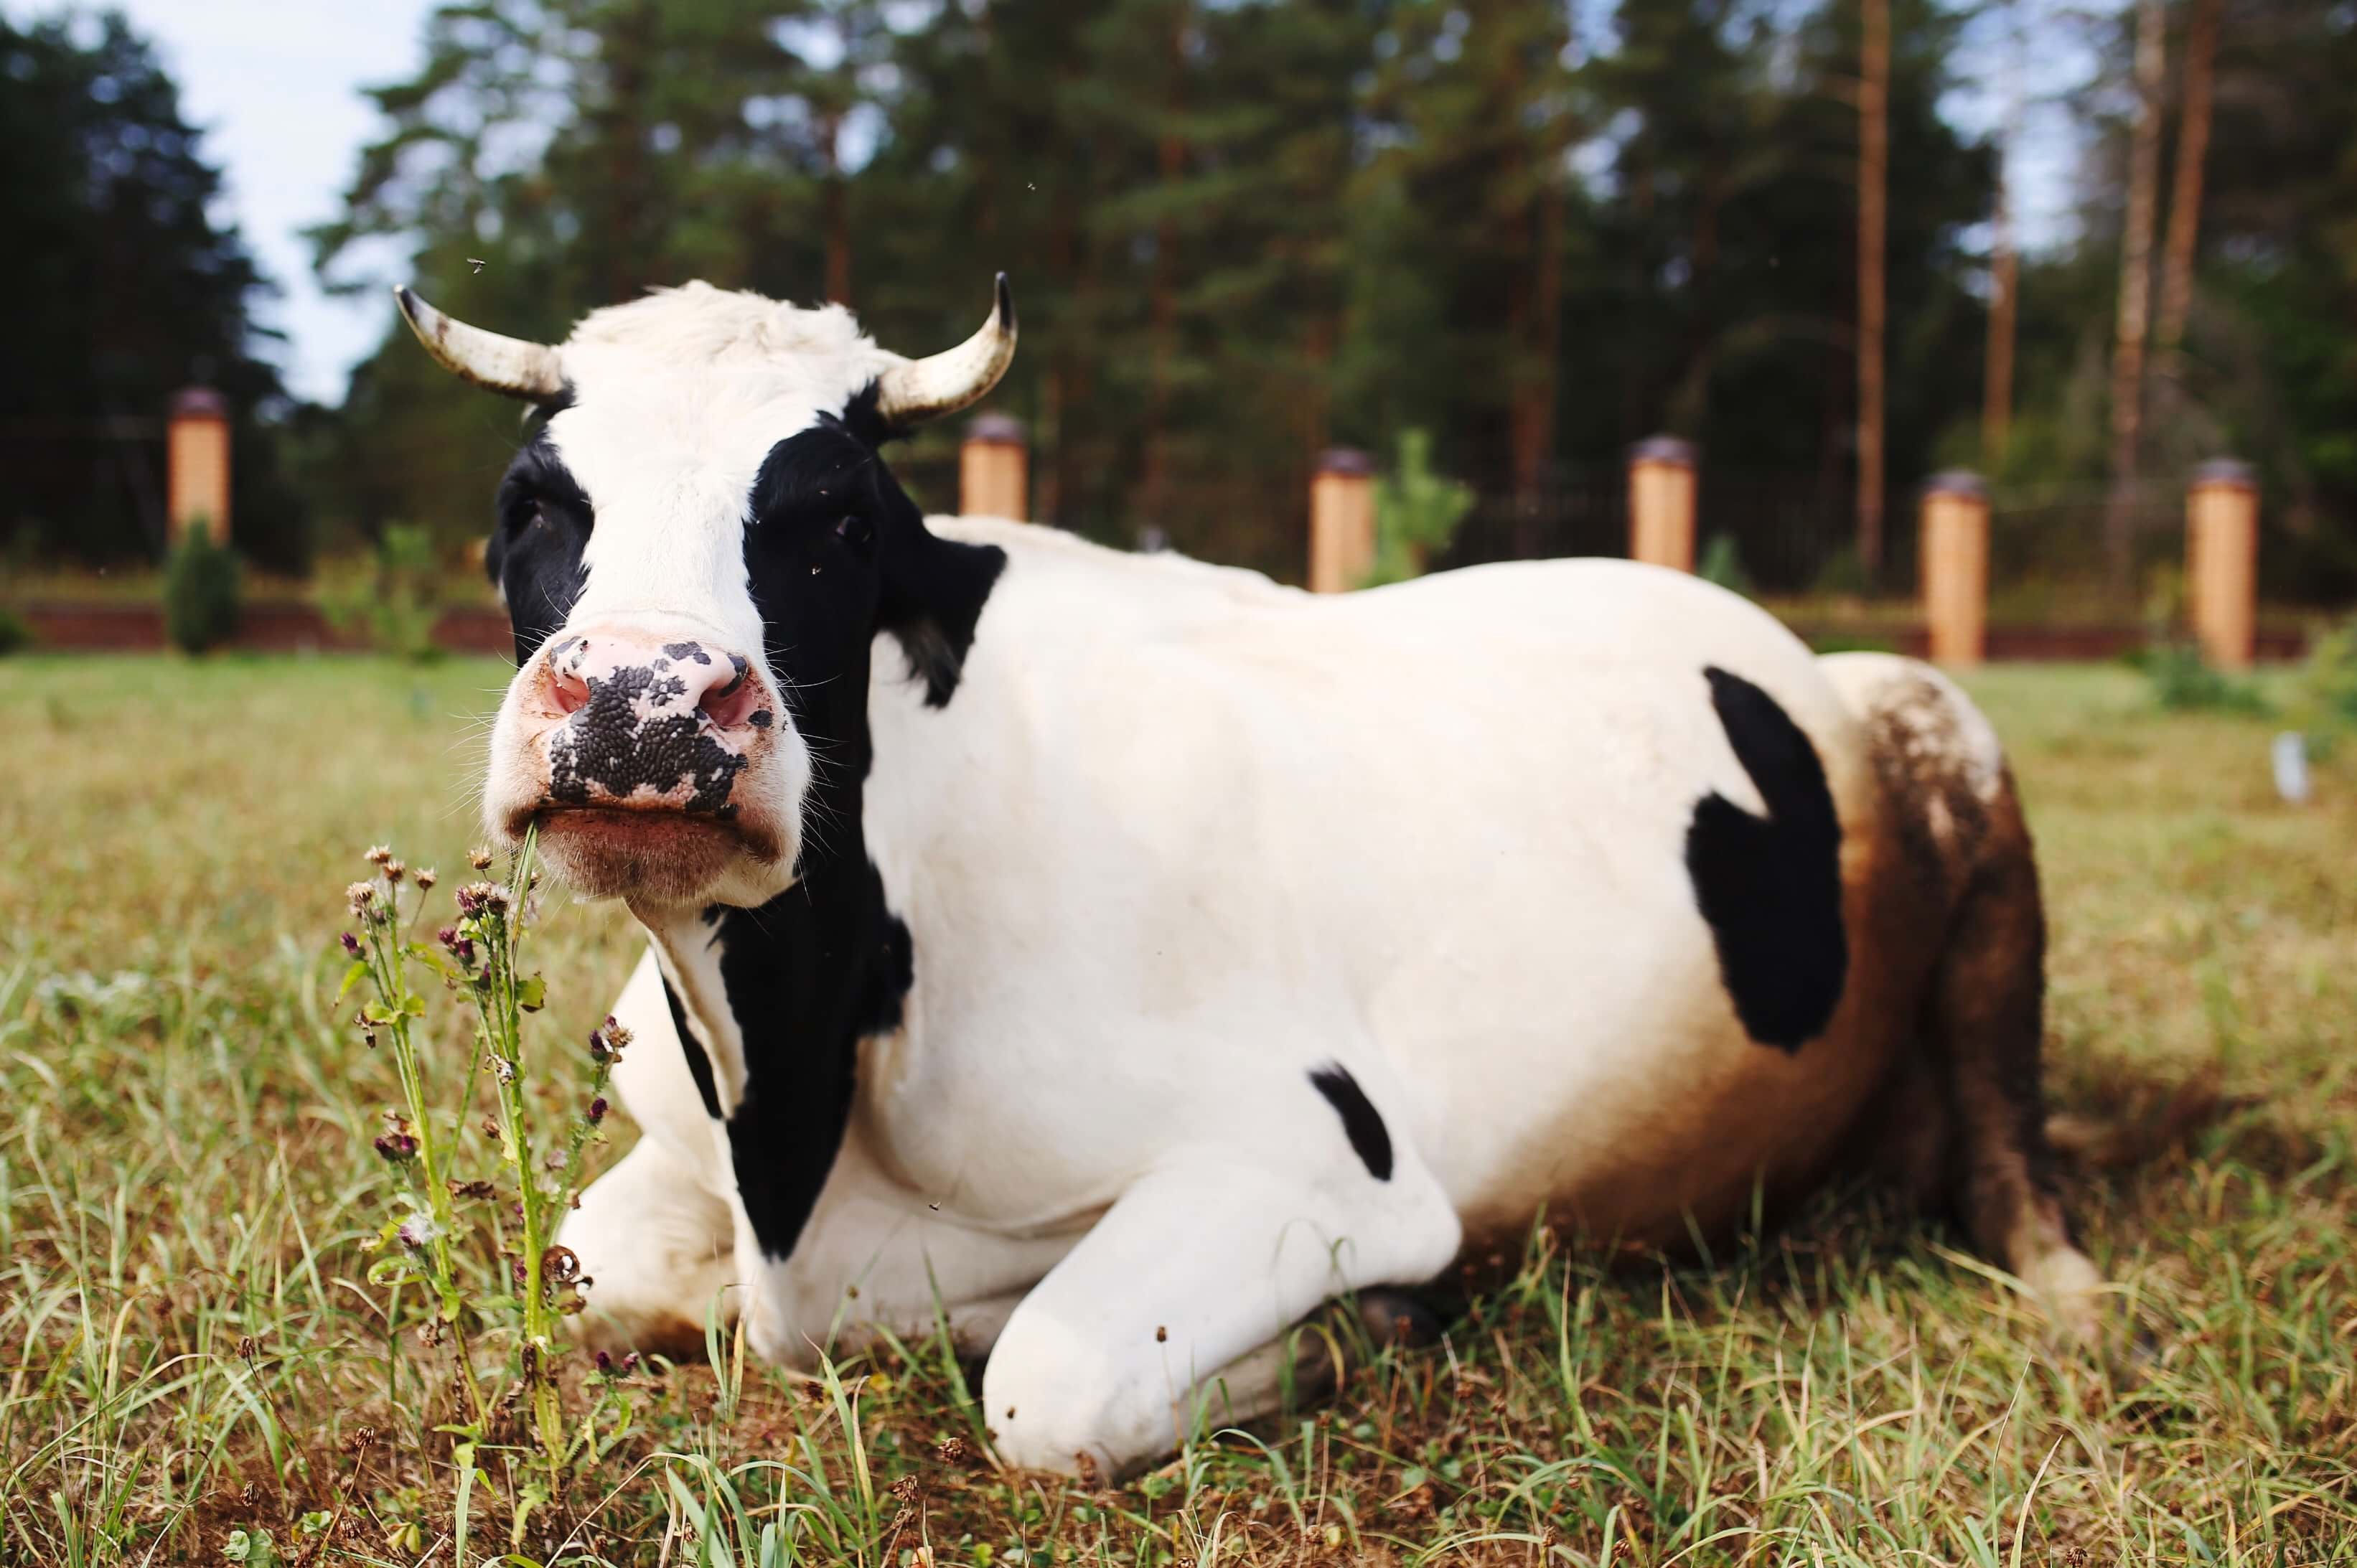 It’s time to lighten up a little and appreciate our cows for the adorable animals that they are!